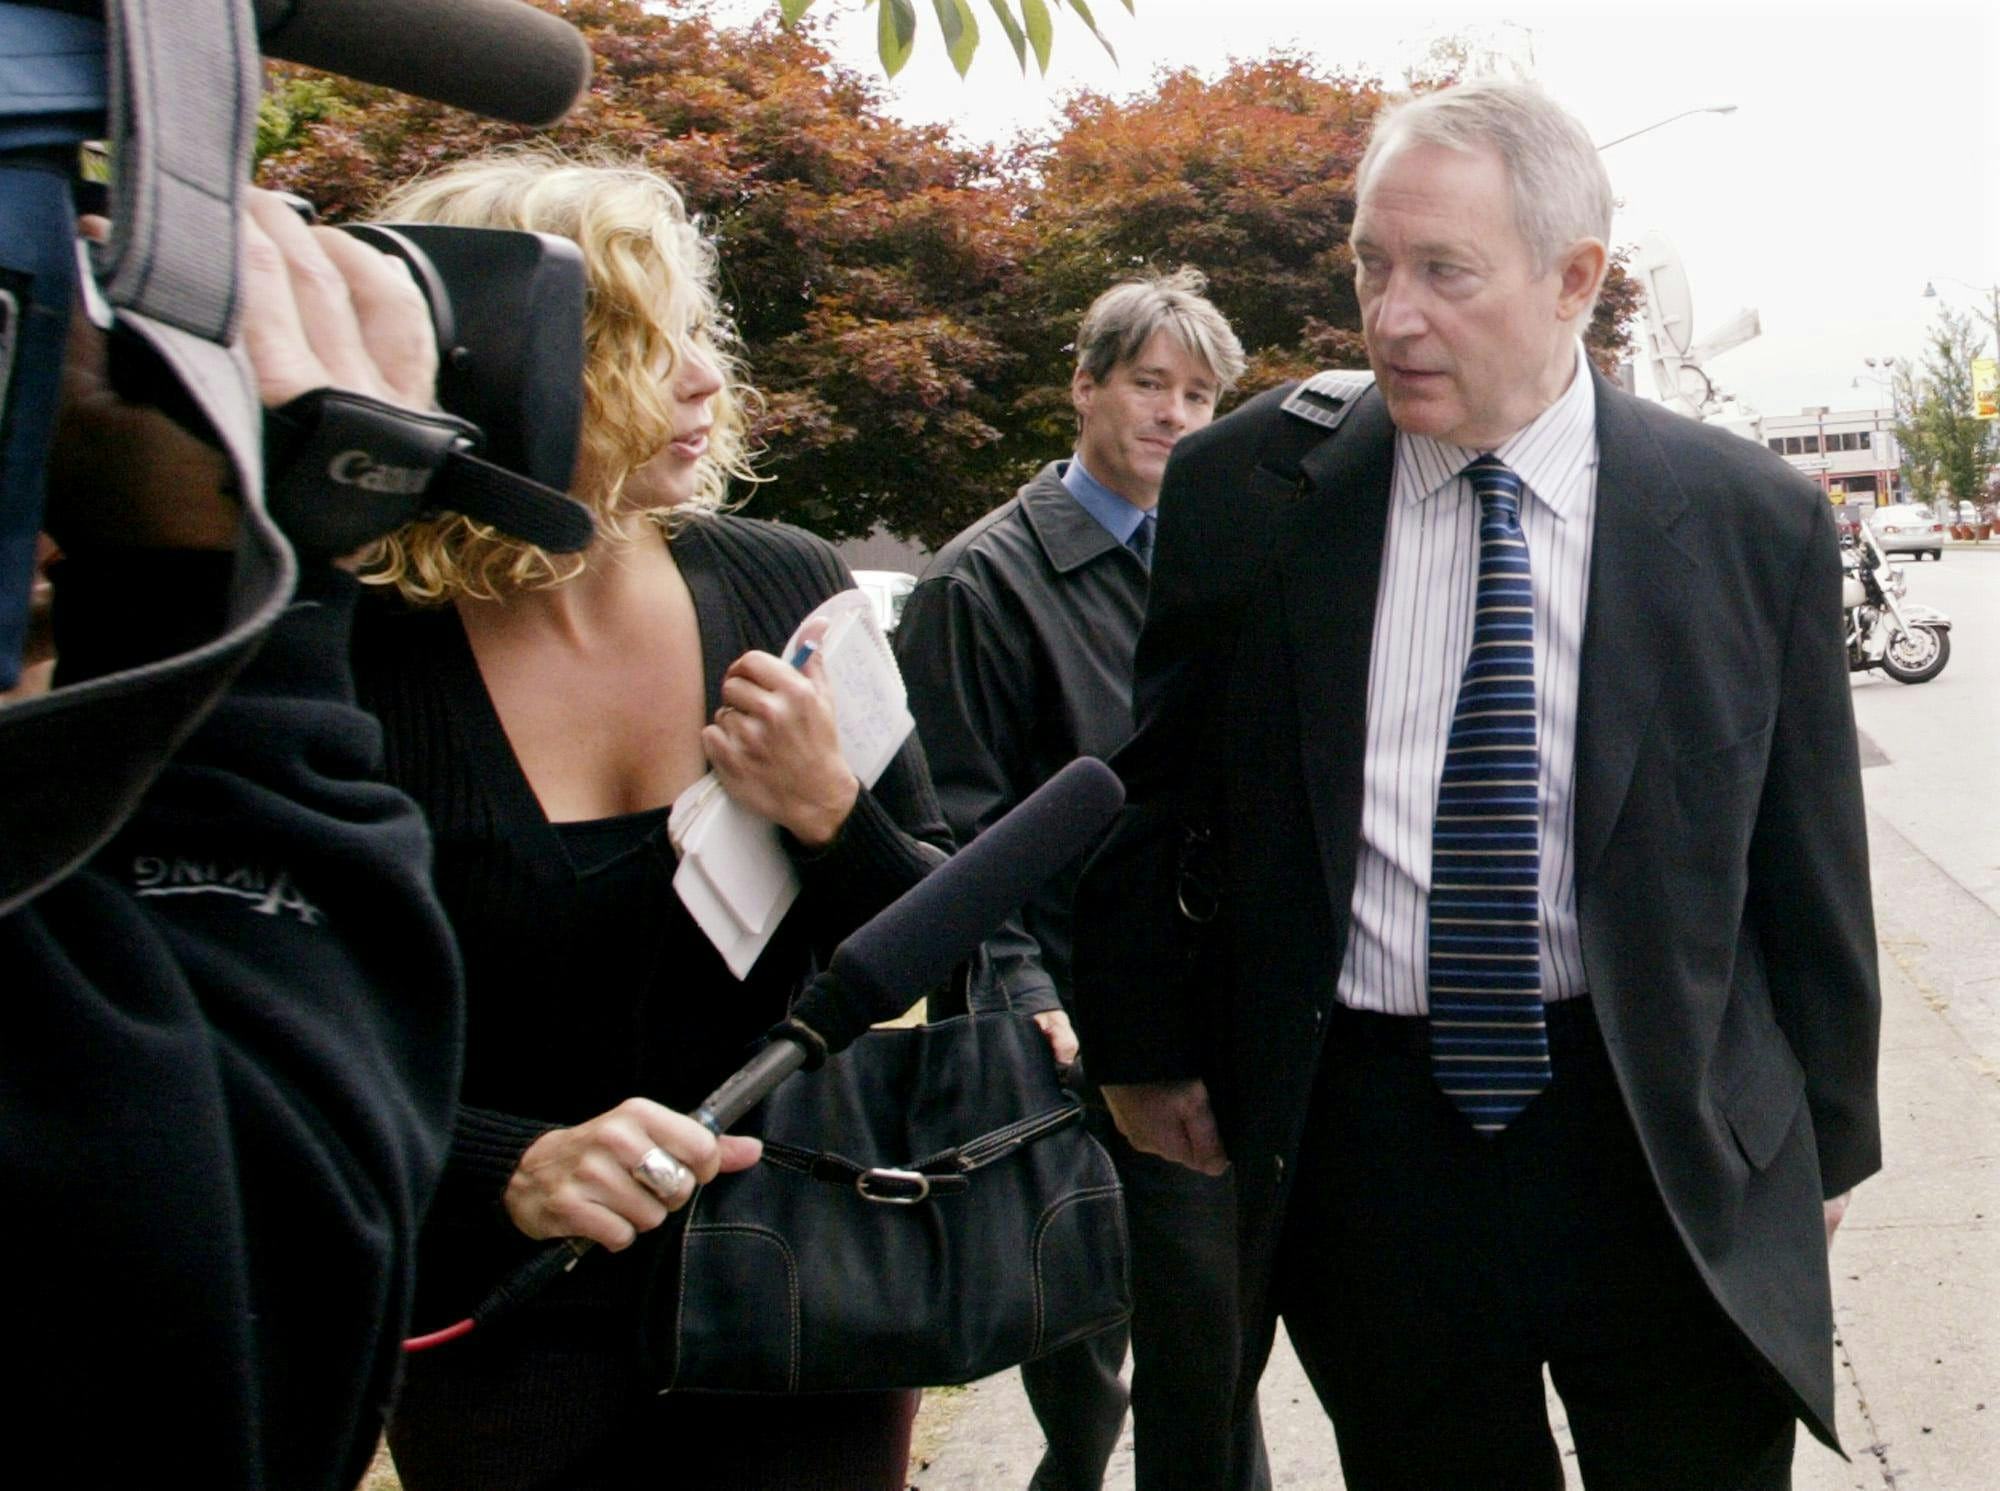 Michael Bolton, dressed in a black suit and striped tie, speaks to reporters on a sidewalk. 